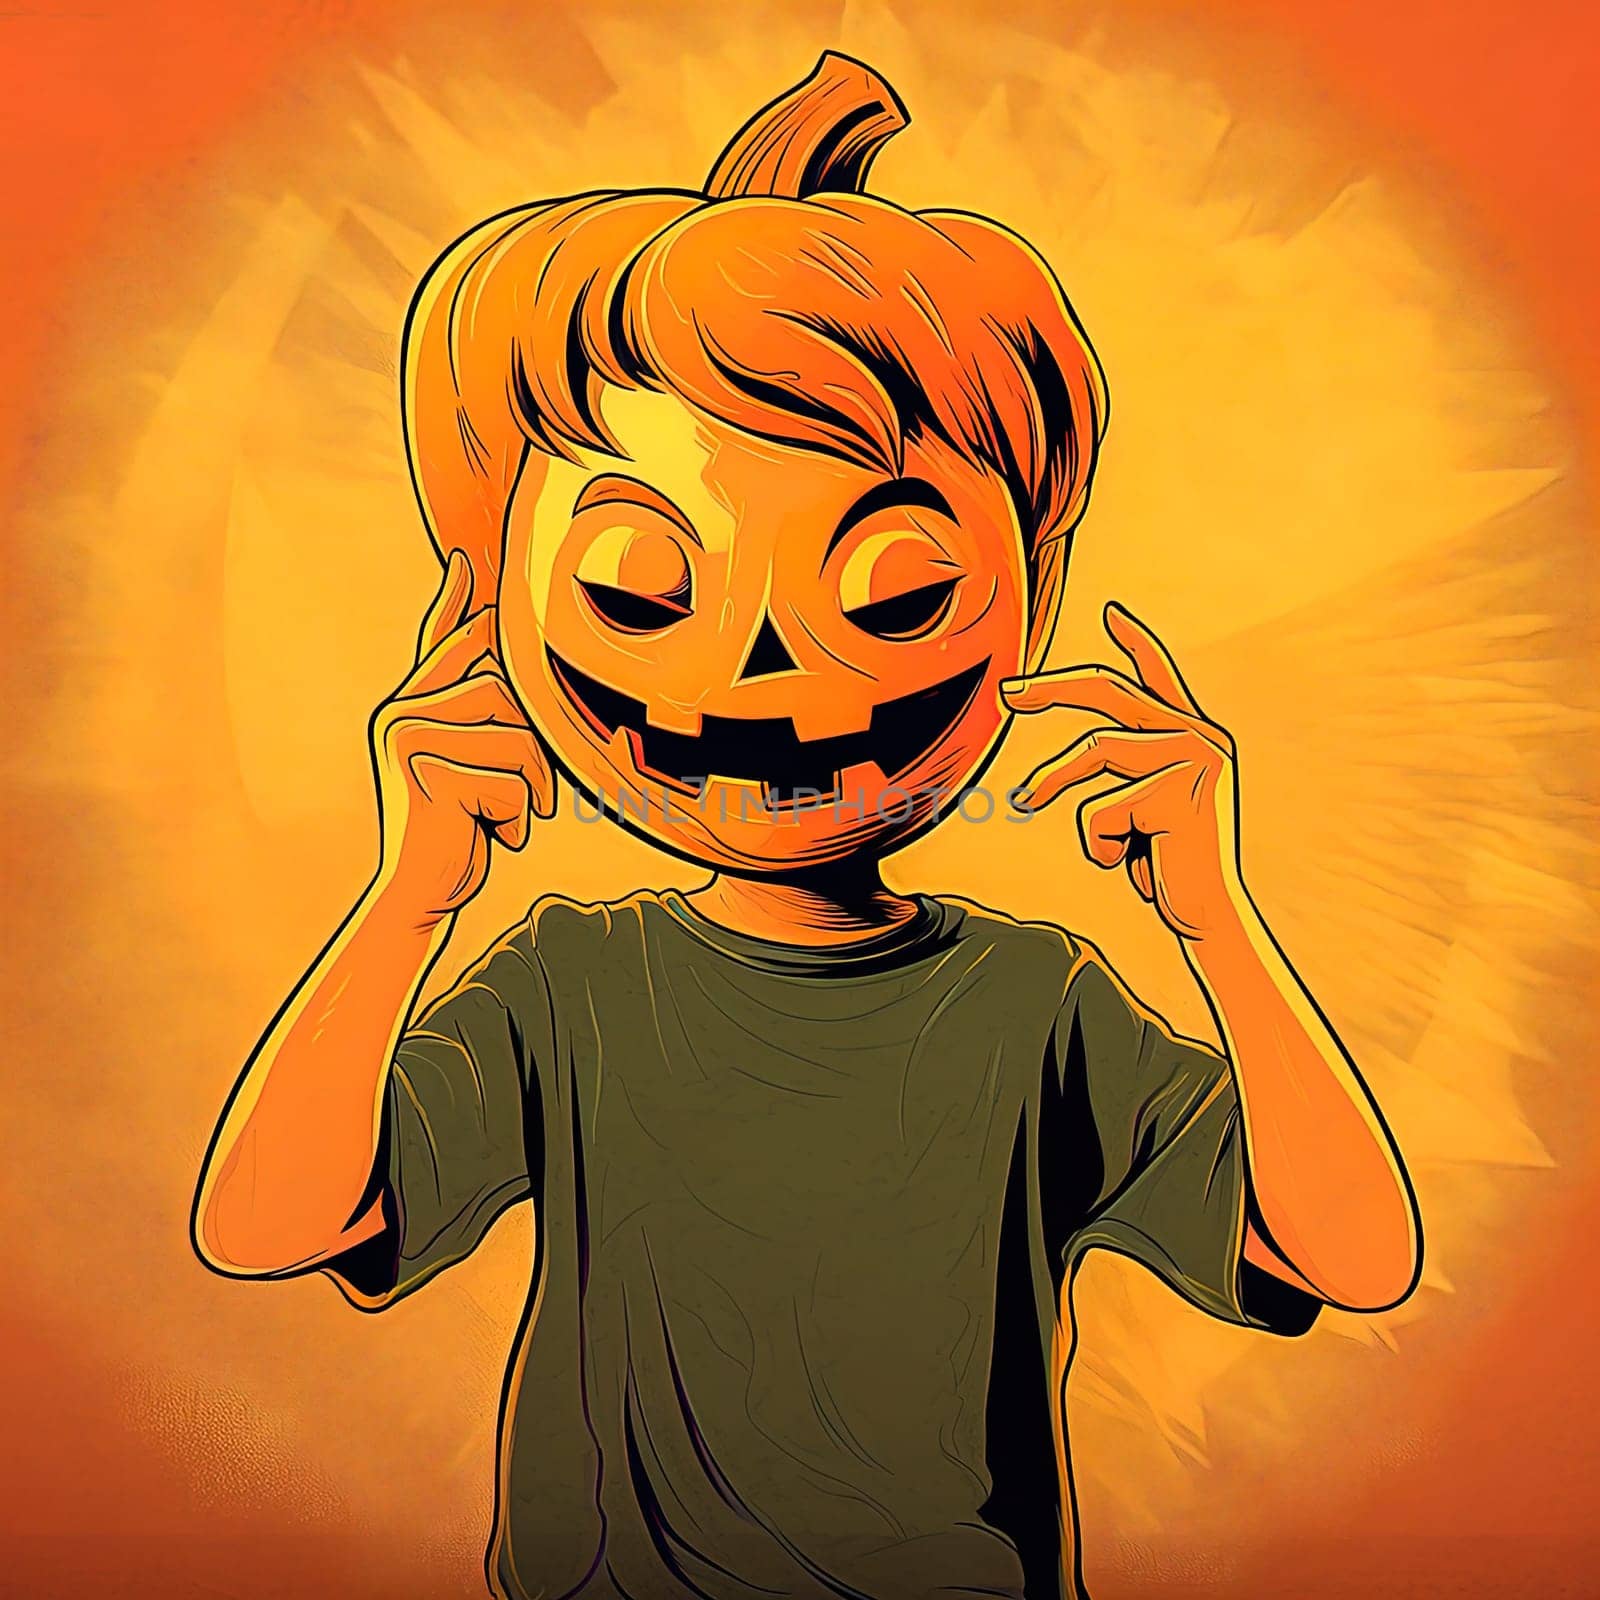 Illustration of a man, instead of a head a pumpkin. Halloween holiday concept. High quality illustration